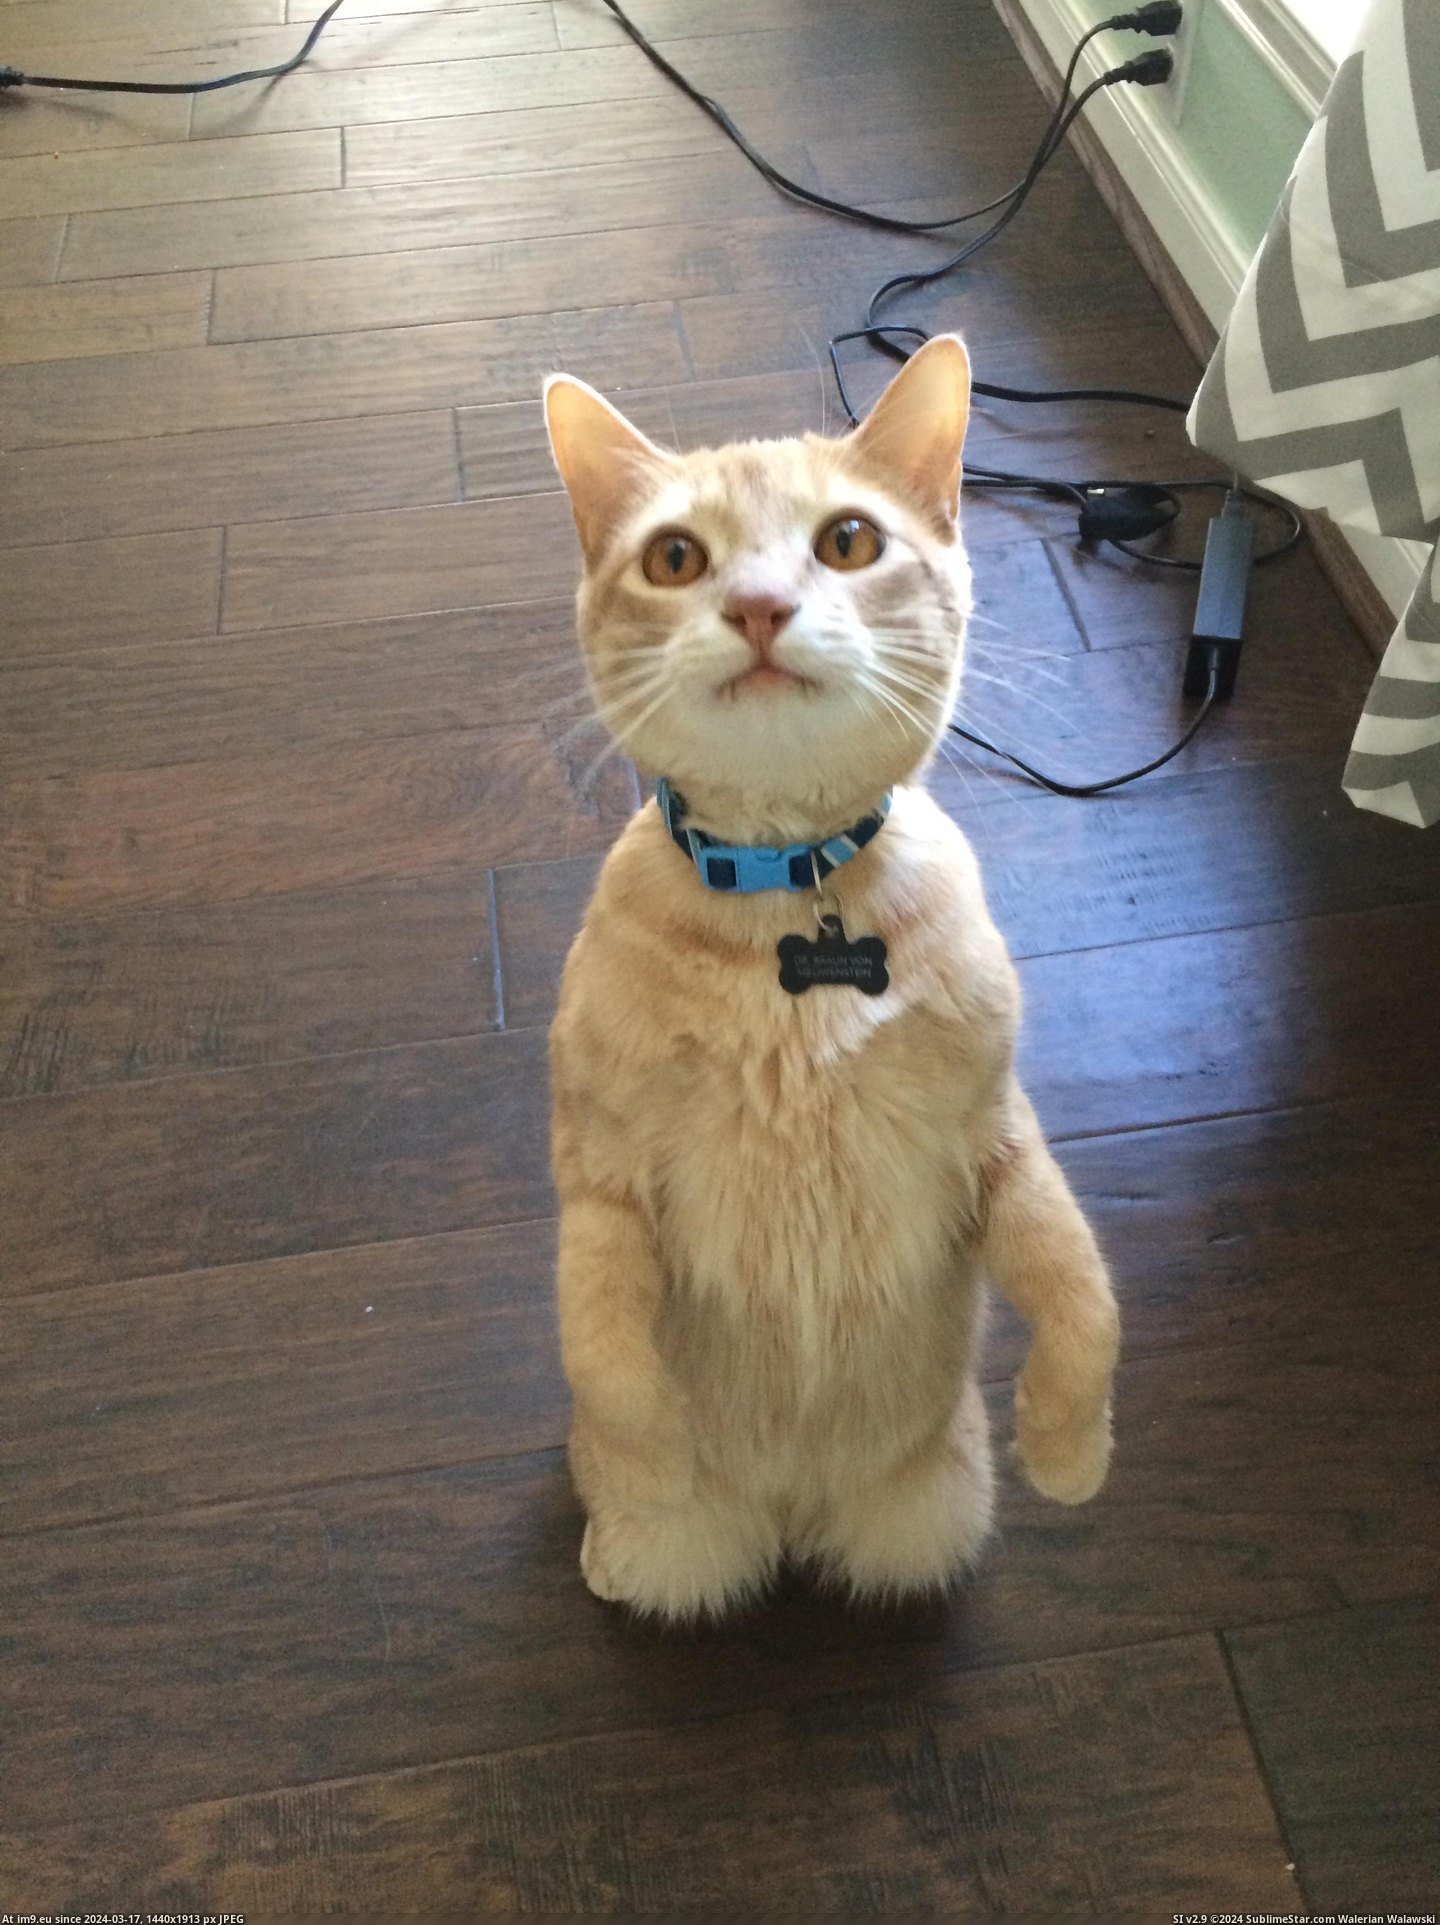 #Cats #Treats #Meowenstein #Sit [Cats] Meowenstein will sit up for treats Pic. (Image of album My r/CATS favs))